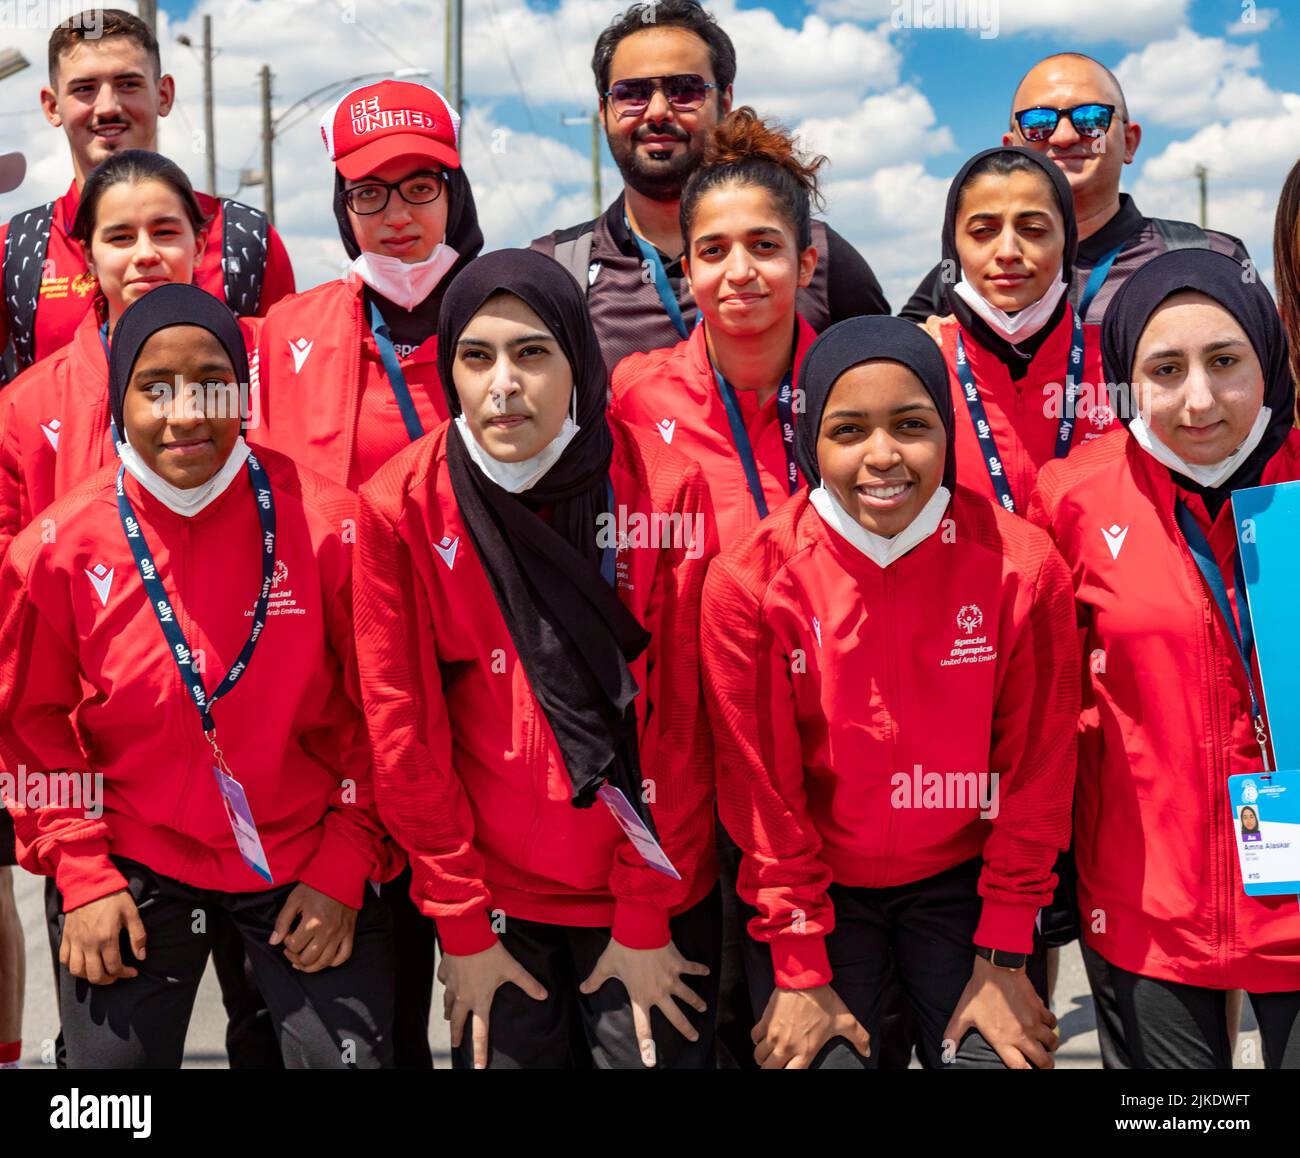 Detroit, Michigan, USA. 31st July, 2022. The United Arab Emirates (UAE) women's team poses for a photo before the beginning of the Special Olympics Unified Cup football (soccer) tournament. The Unified Cup pairs athletes with and without intellectual disabilities as teammates. Credit: Jim West/Alamy Live News Stock Photo